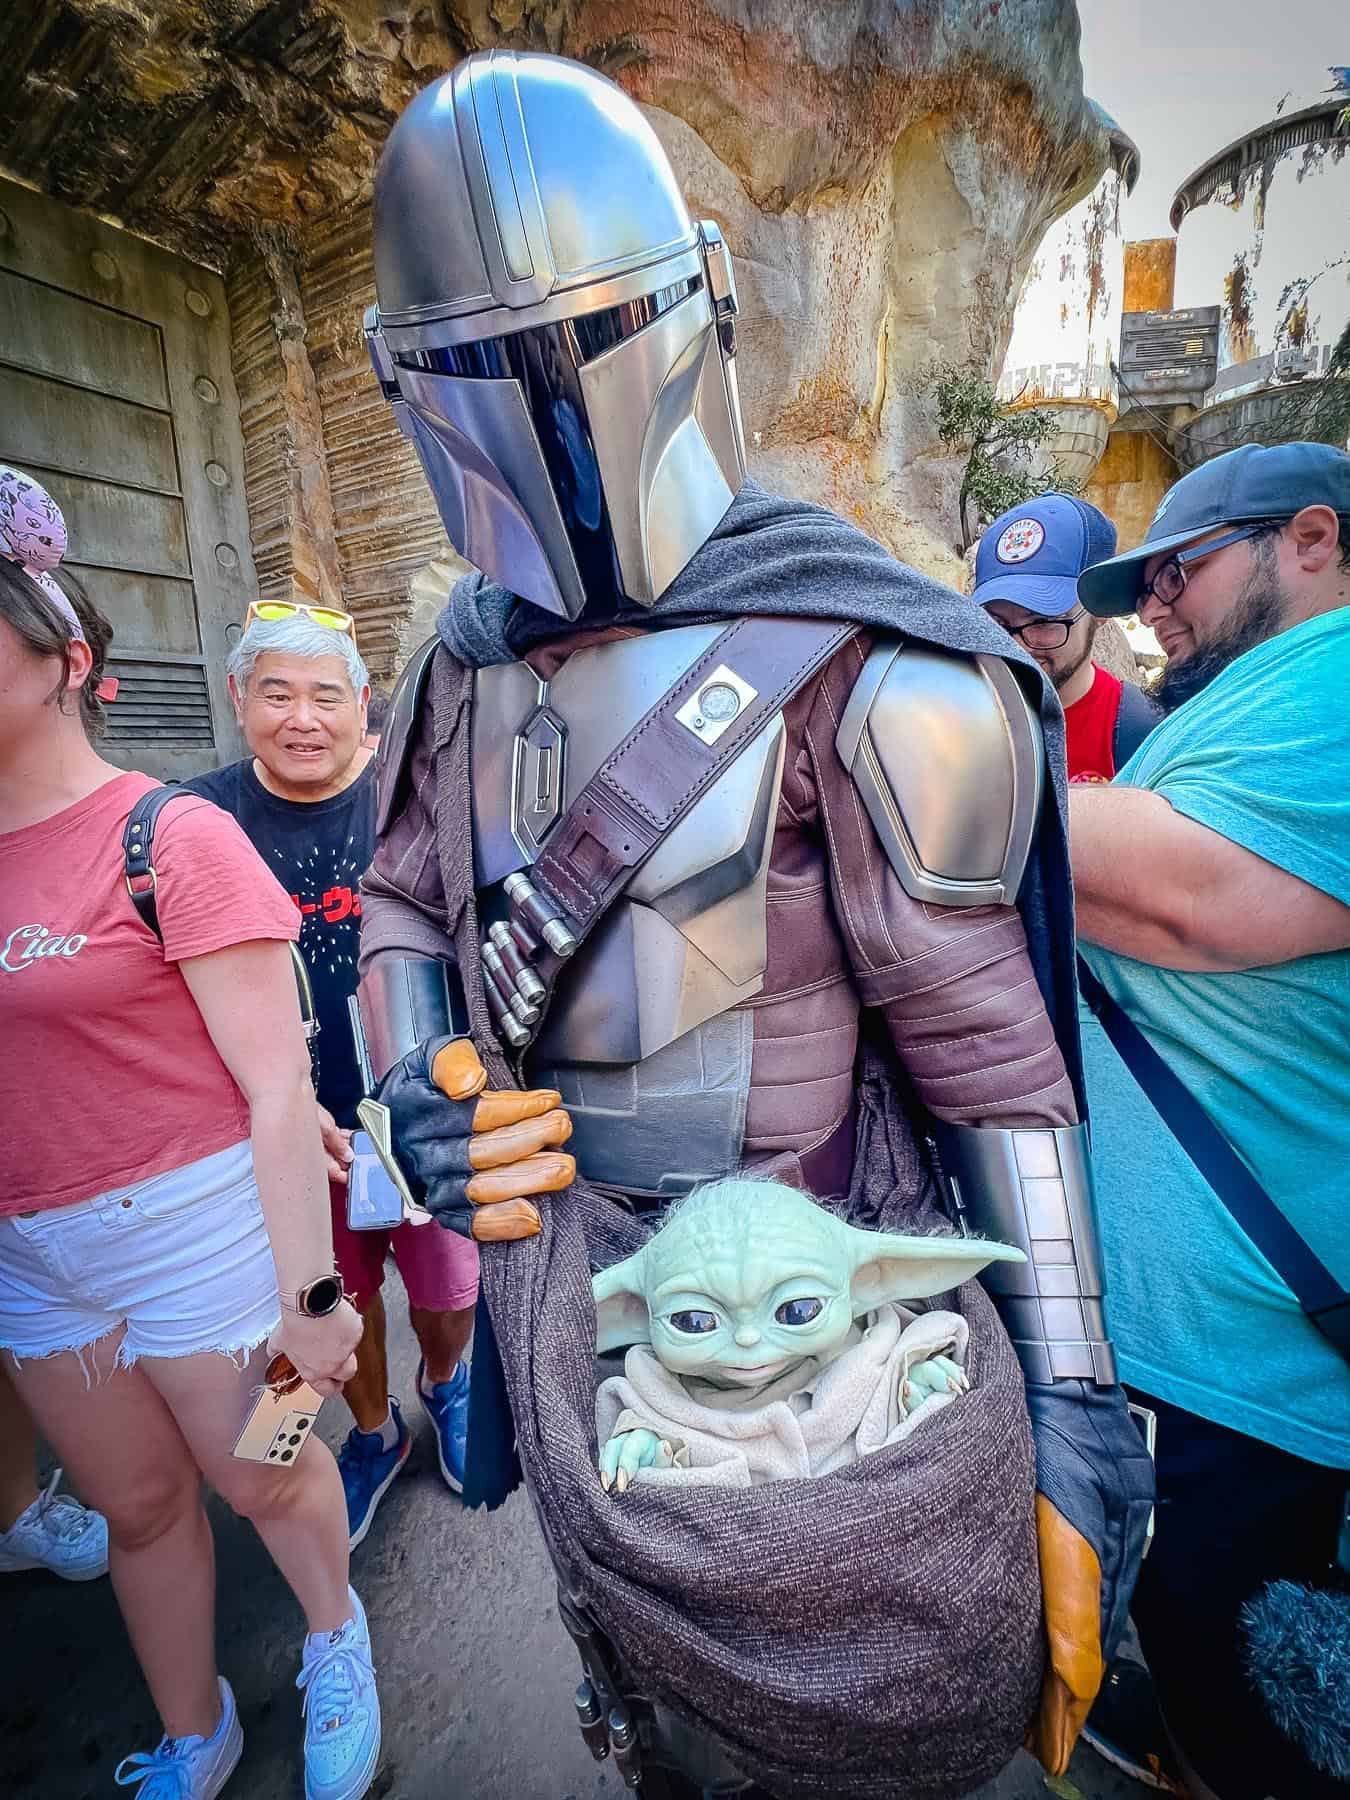 Grogu and The Mandalorian greeting guests in Galaxy's Edge at Disney World. 